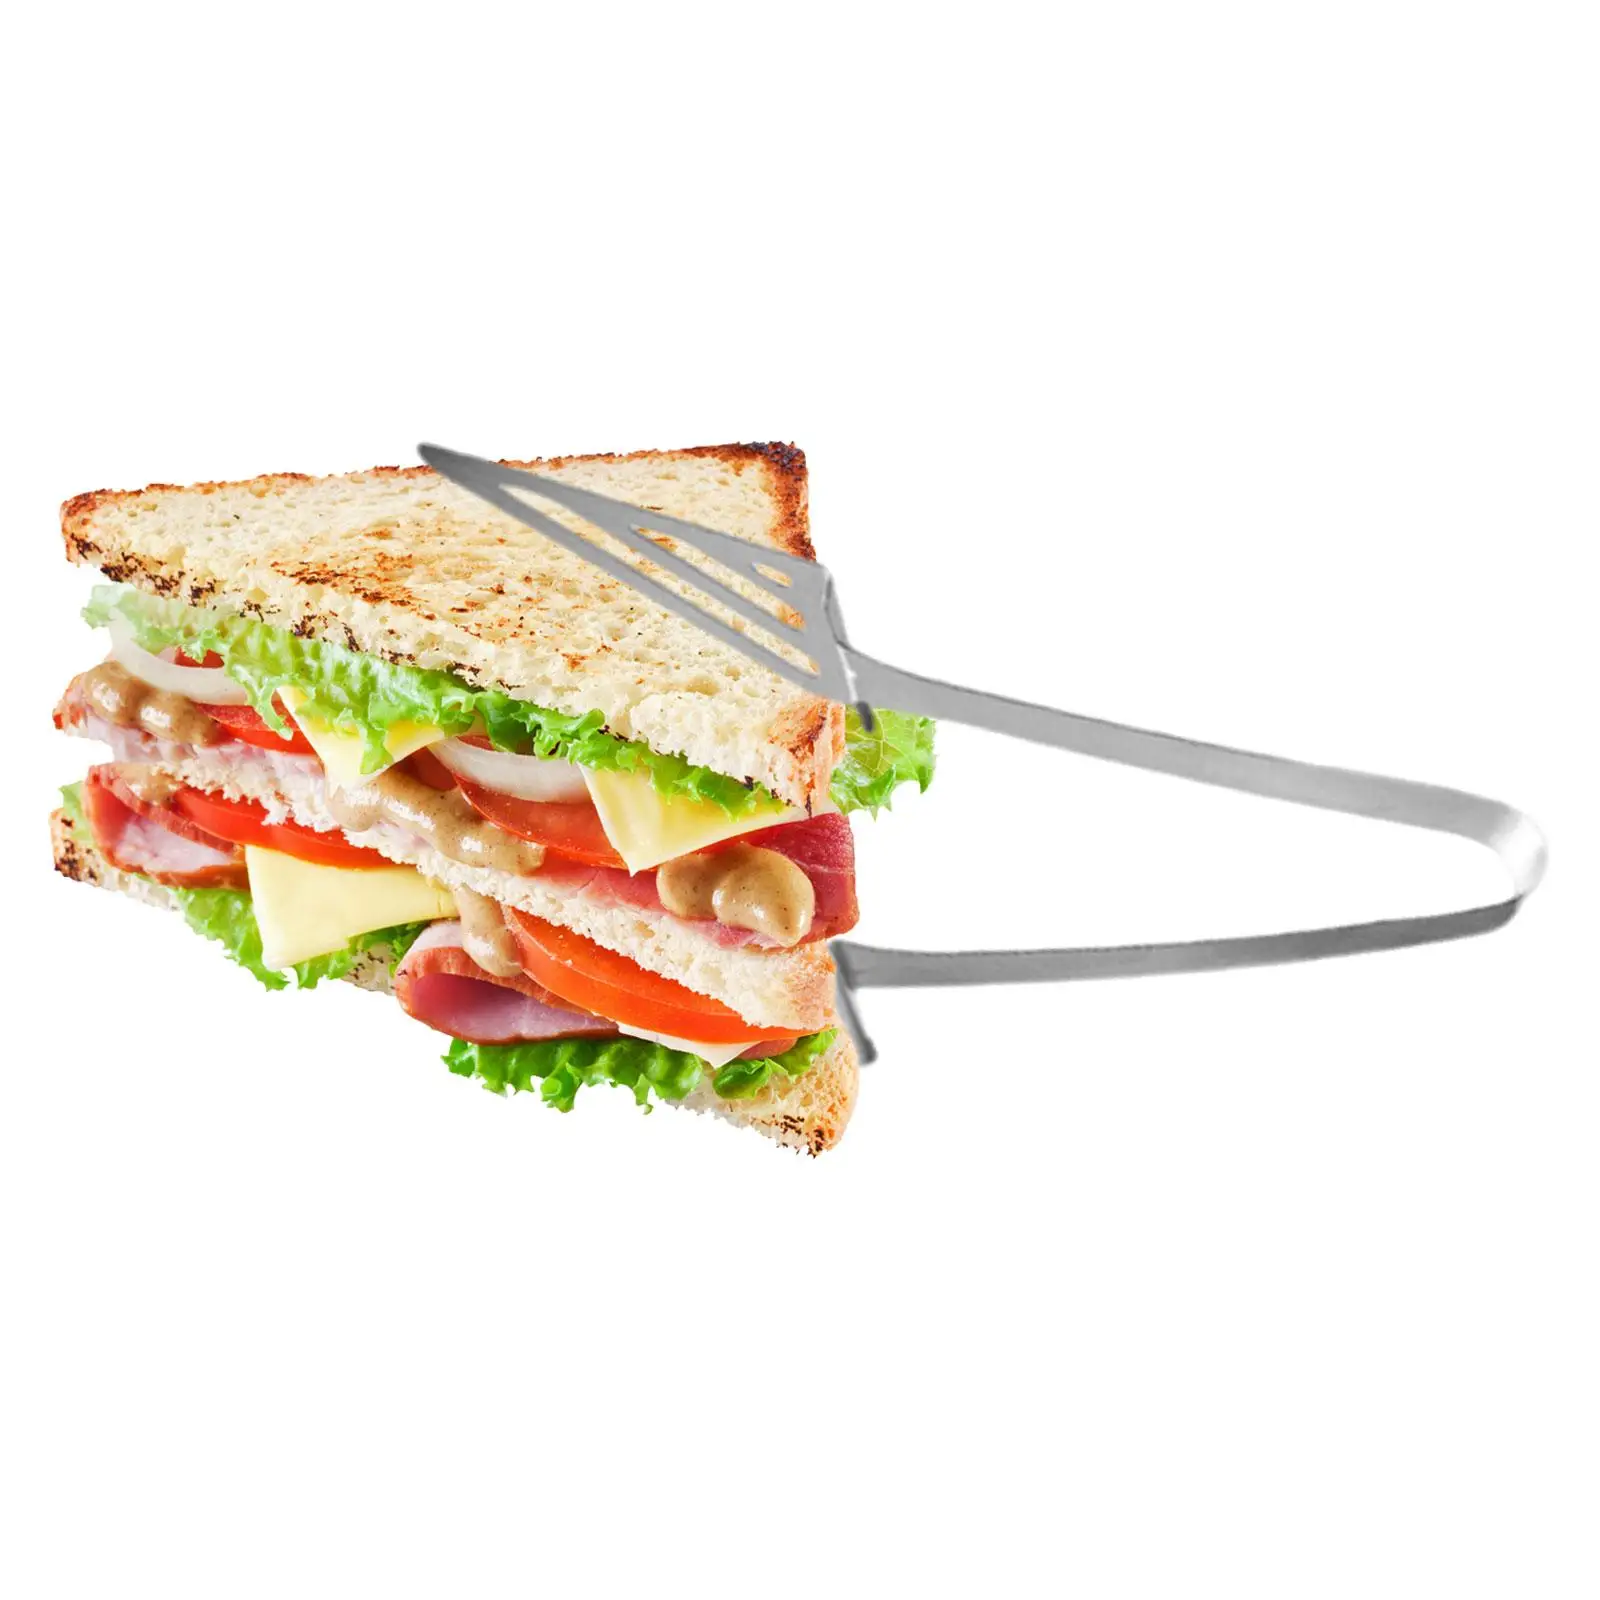 Food Tongs Food Clip Kitchenware Kitchen Tools Stainless Steel Pastry Serving Tongs for Home Barbecue Bakery Party BBQ